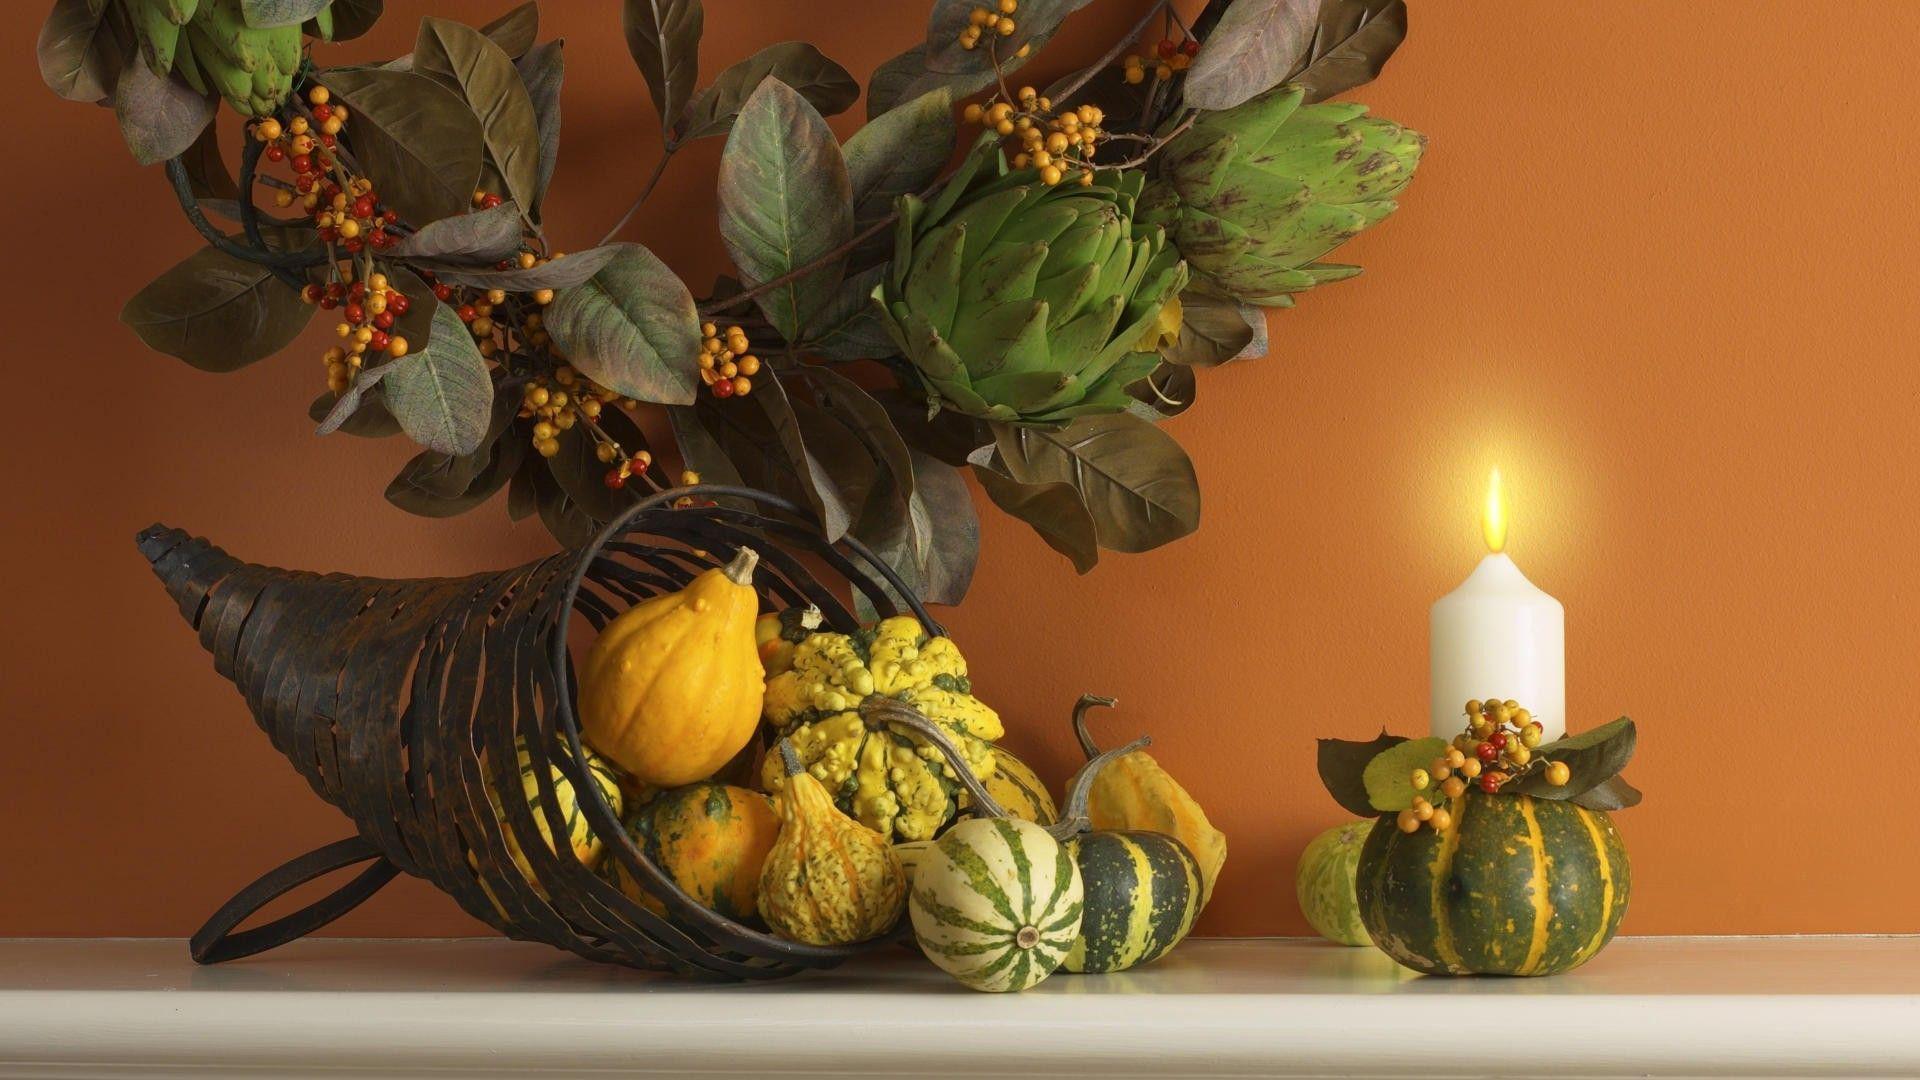 Thanksgiving holiday HD free wallpaper background image